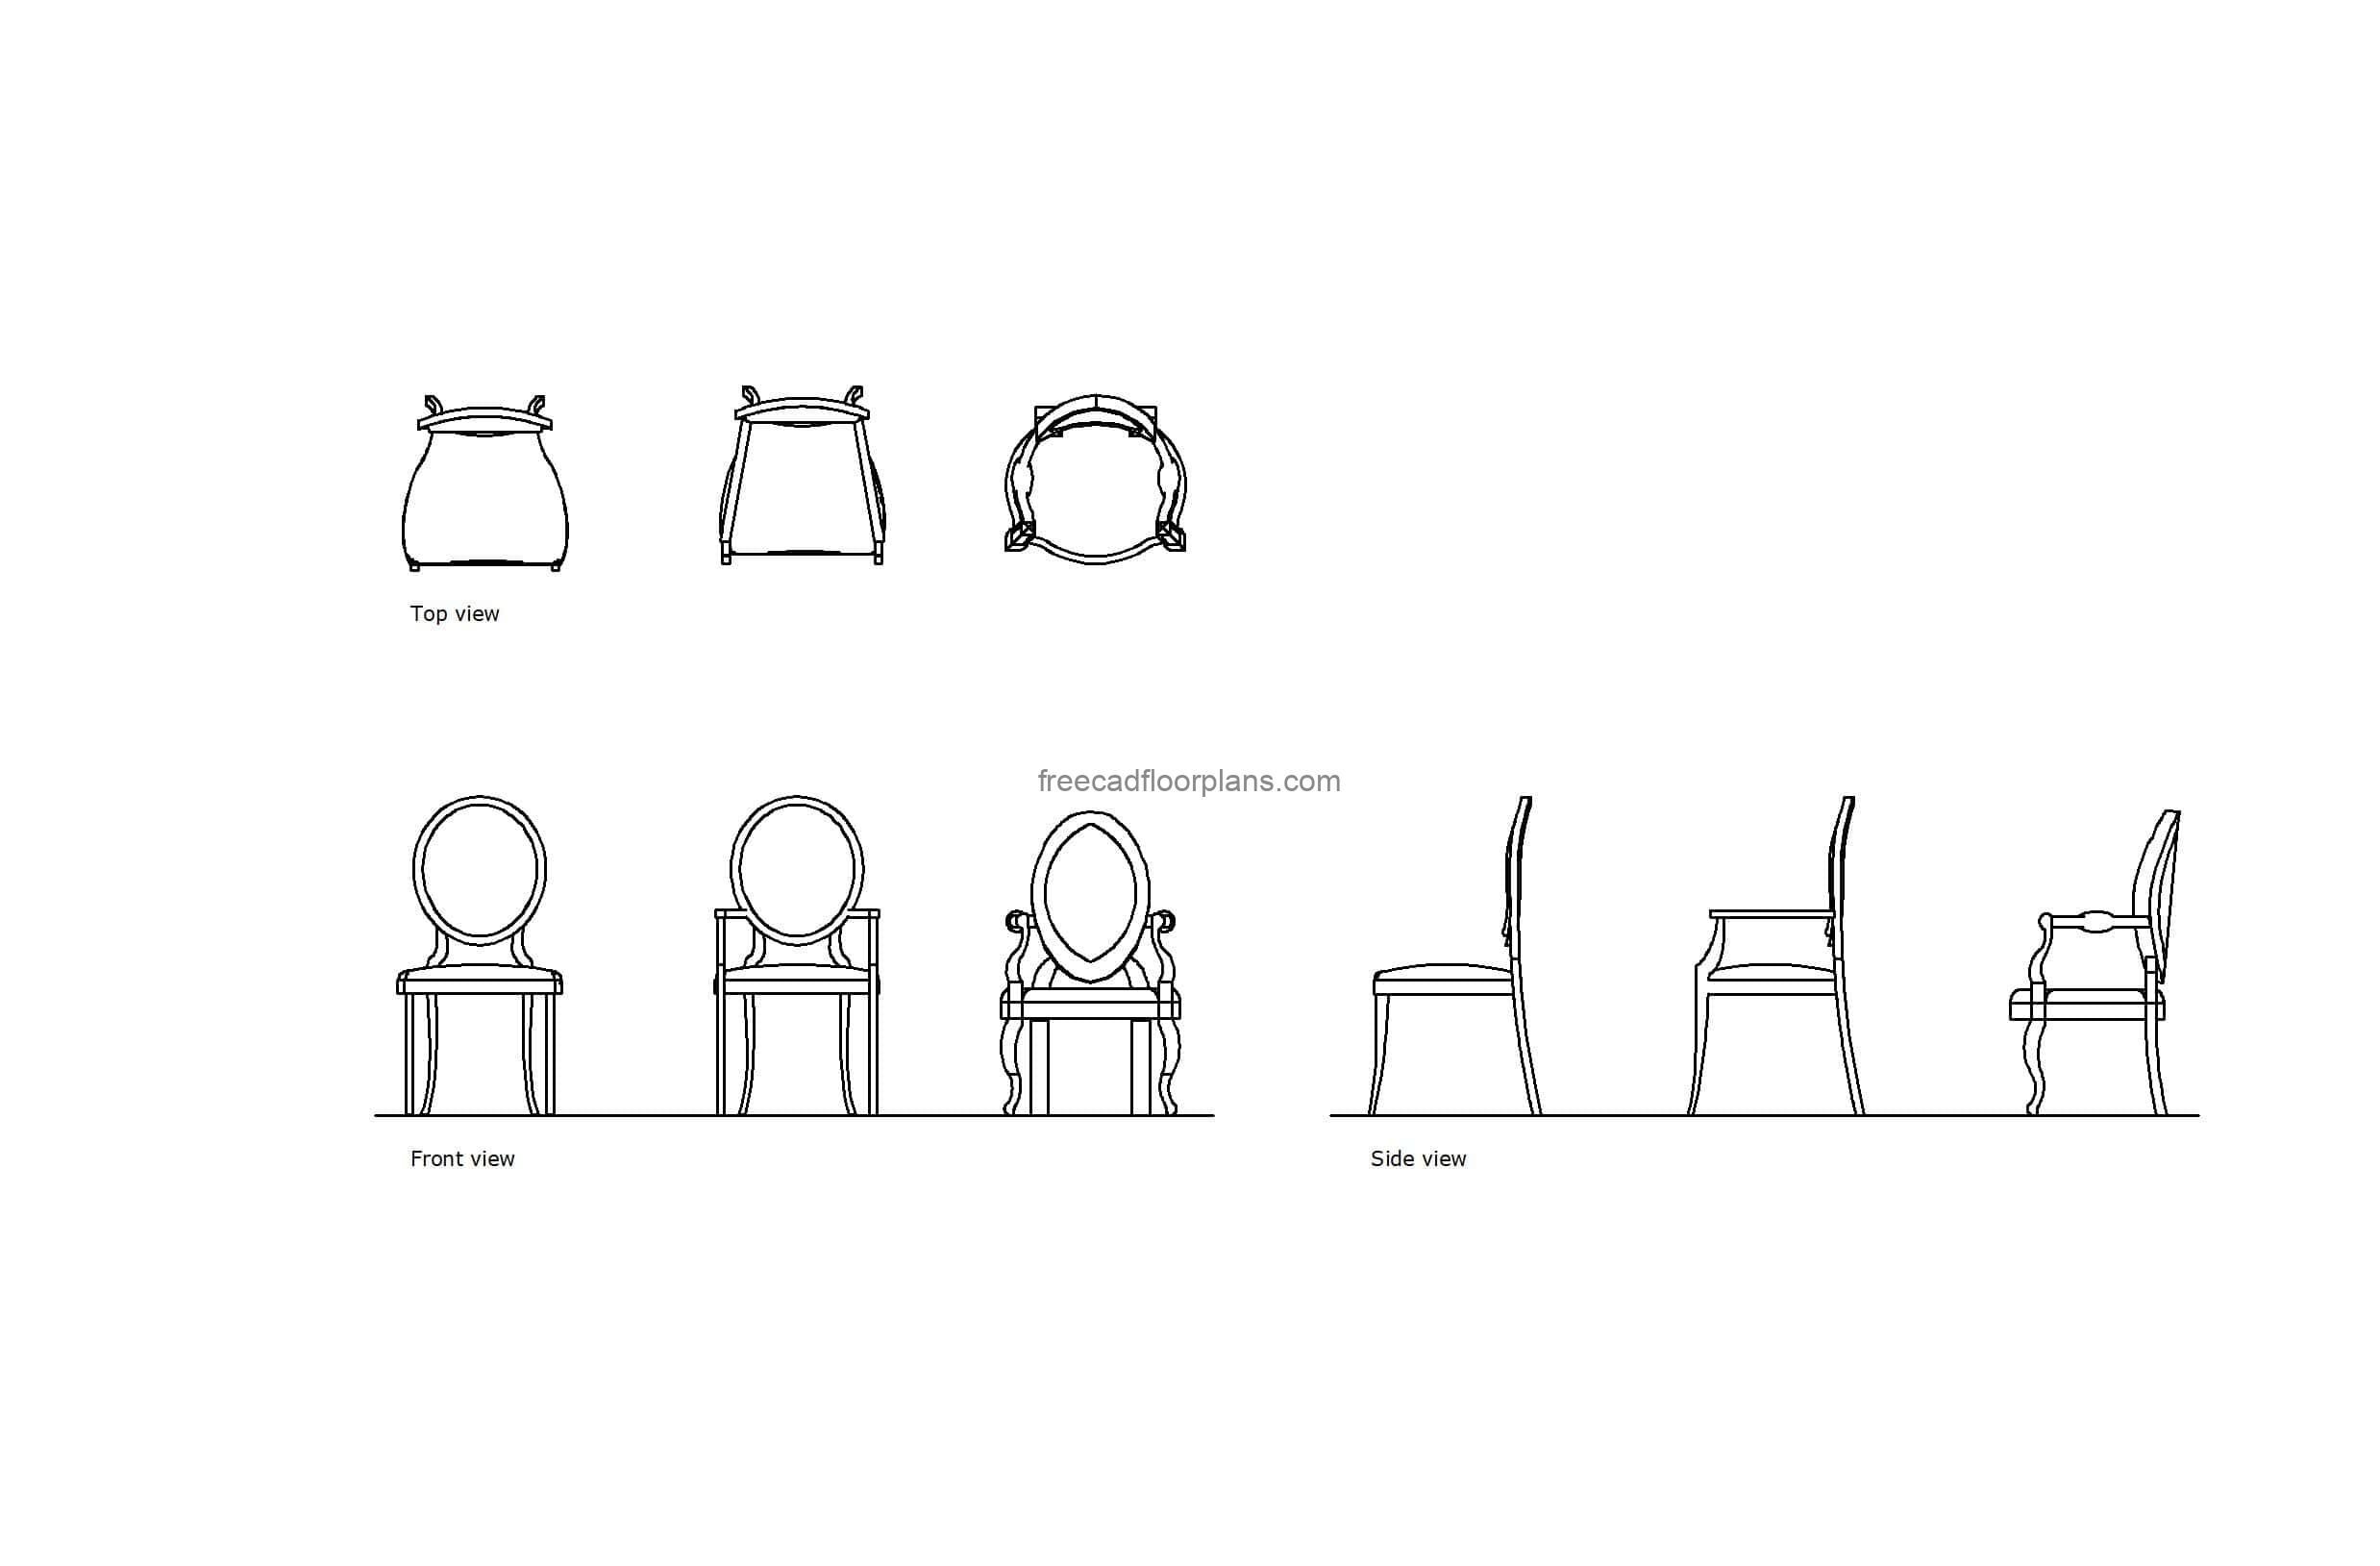 autocad drawing of different victorian chairs, 2d views plan and elevations, dwg file free for download